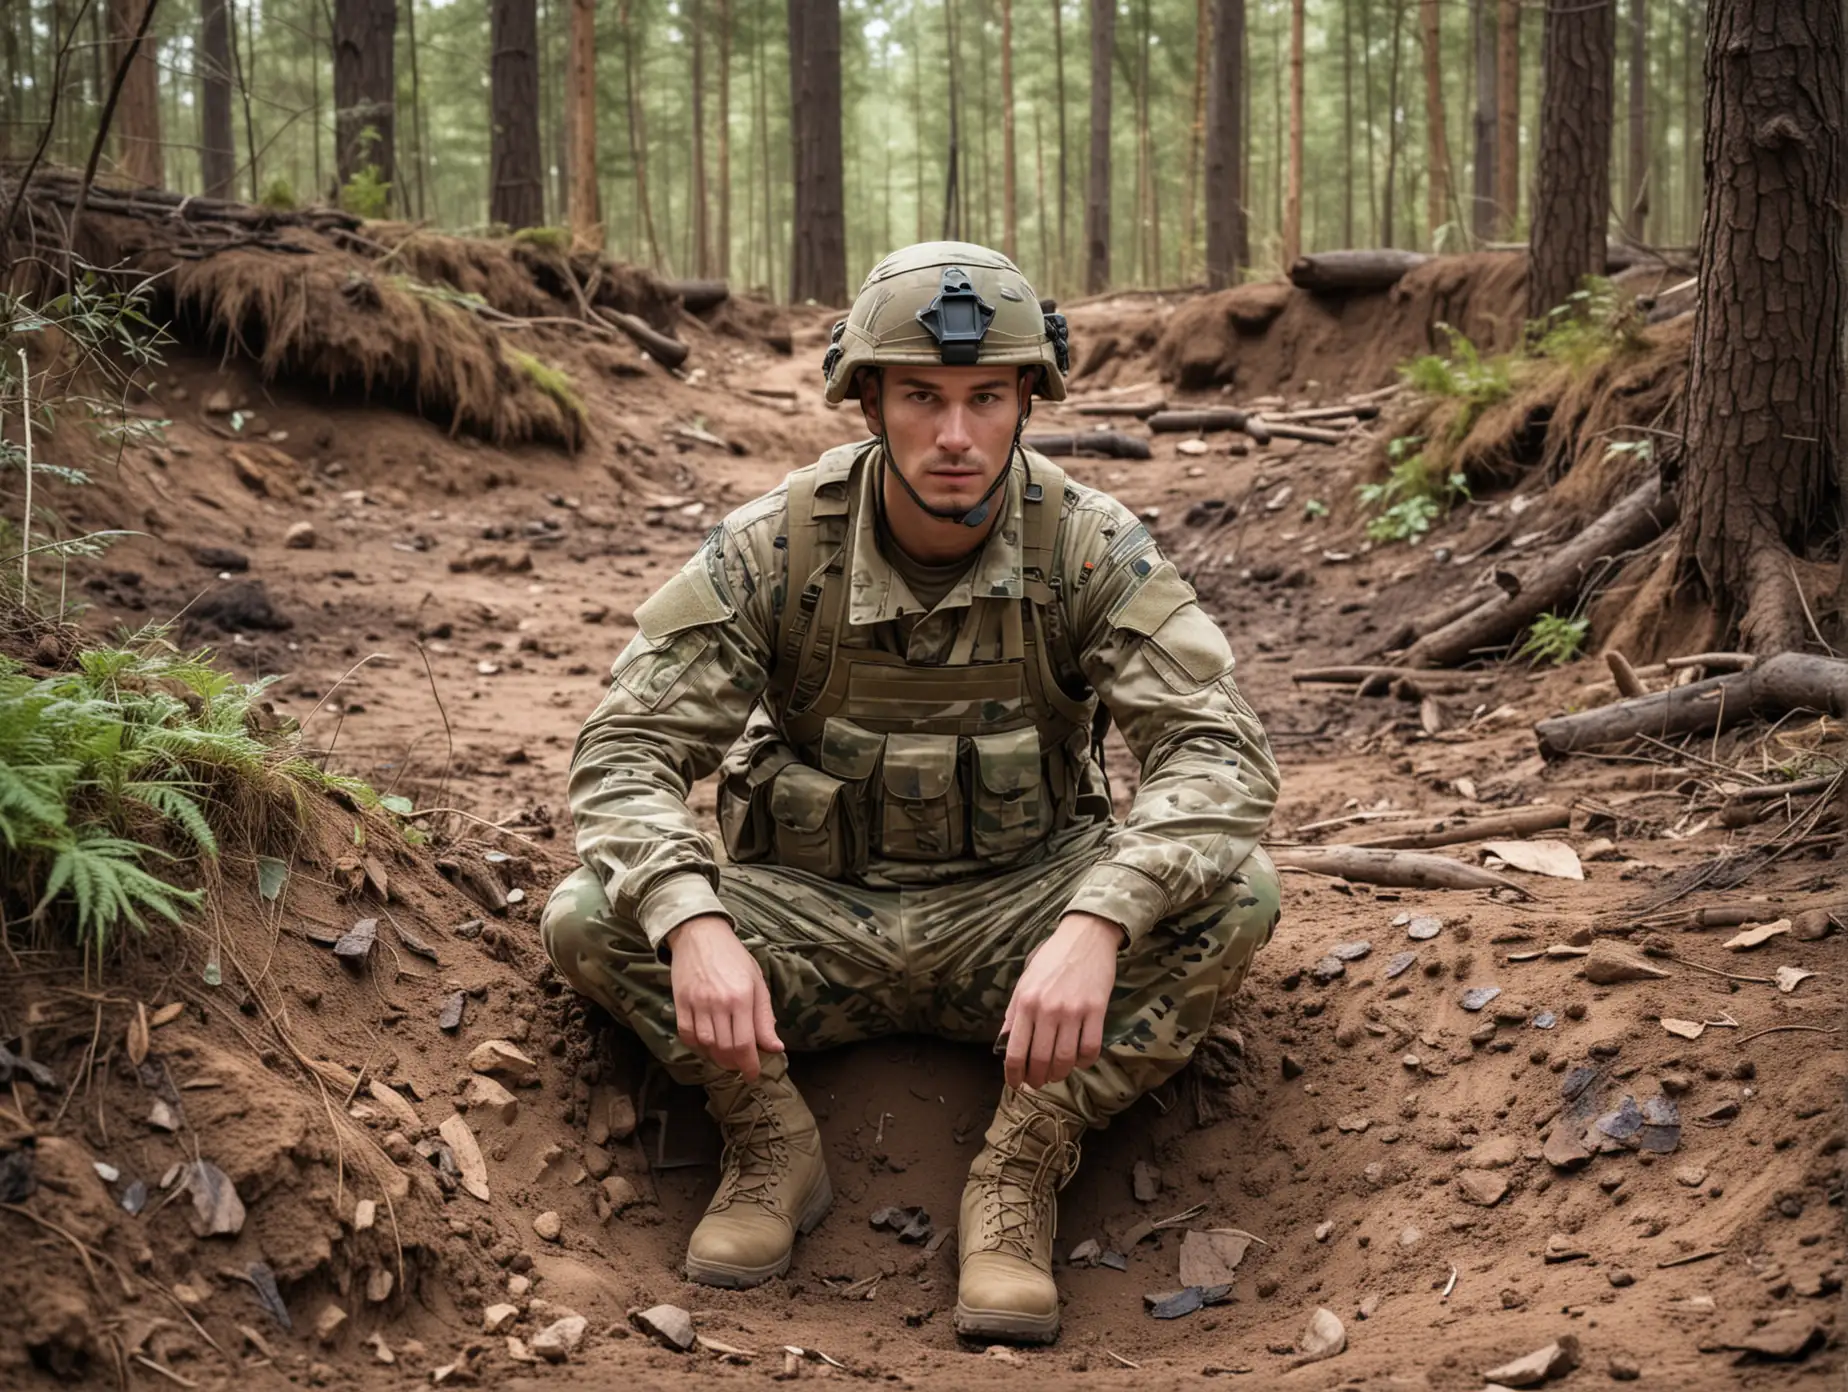 In a wide, covered dirt hole, one modern soldier wearing multicam is resting, dense forest background